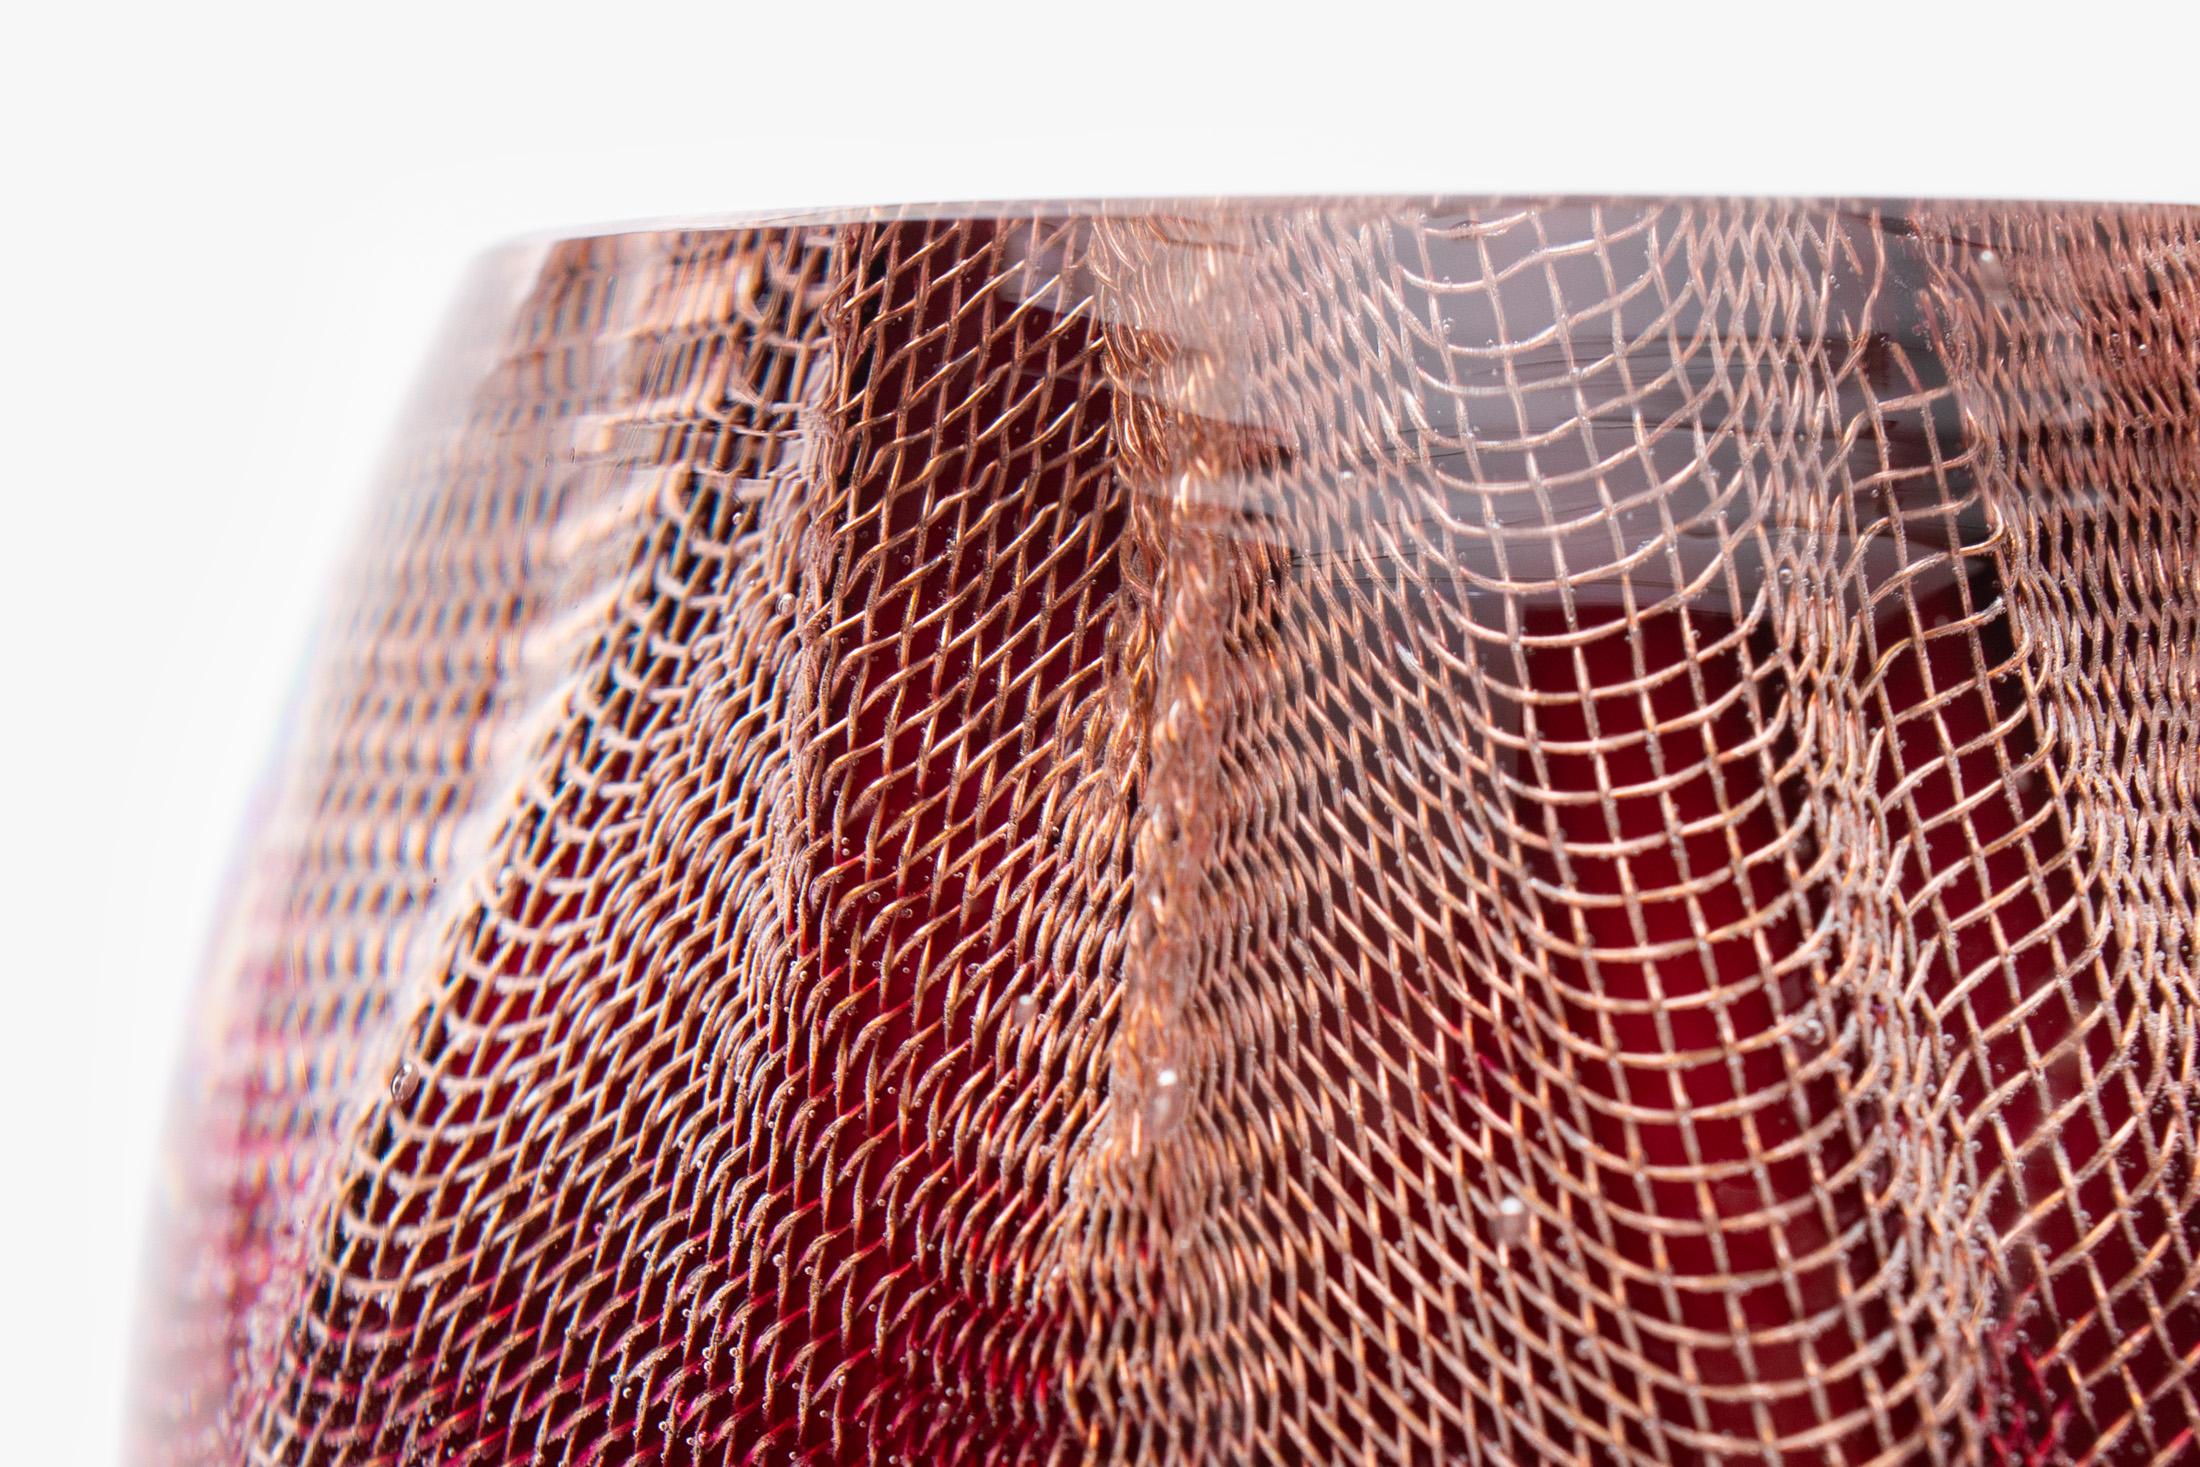 Glass and Copper Mesh Vase by Omer Arbel For OAO Works, Fuschia In New Condition For Sale In Vancouver, British Columbia